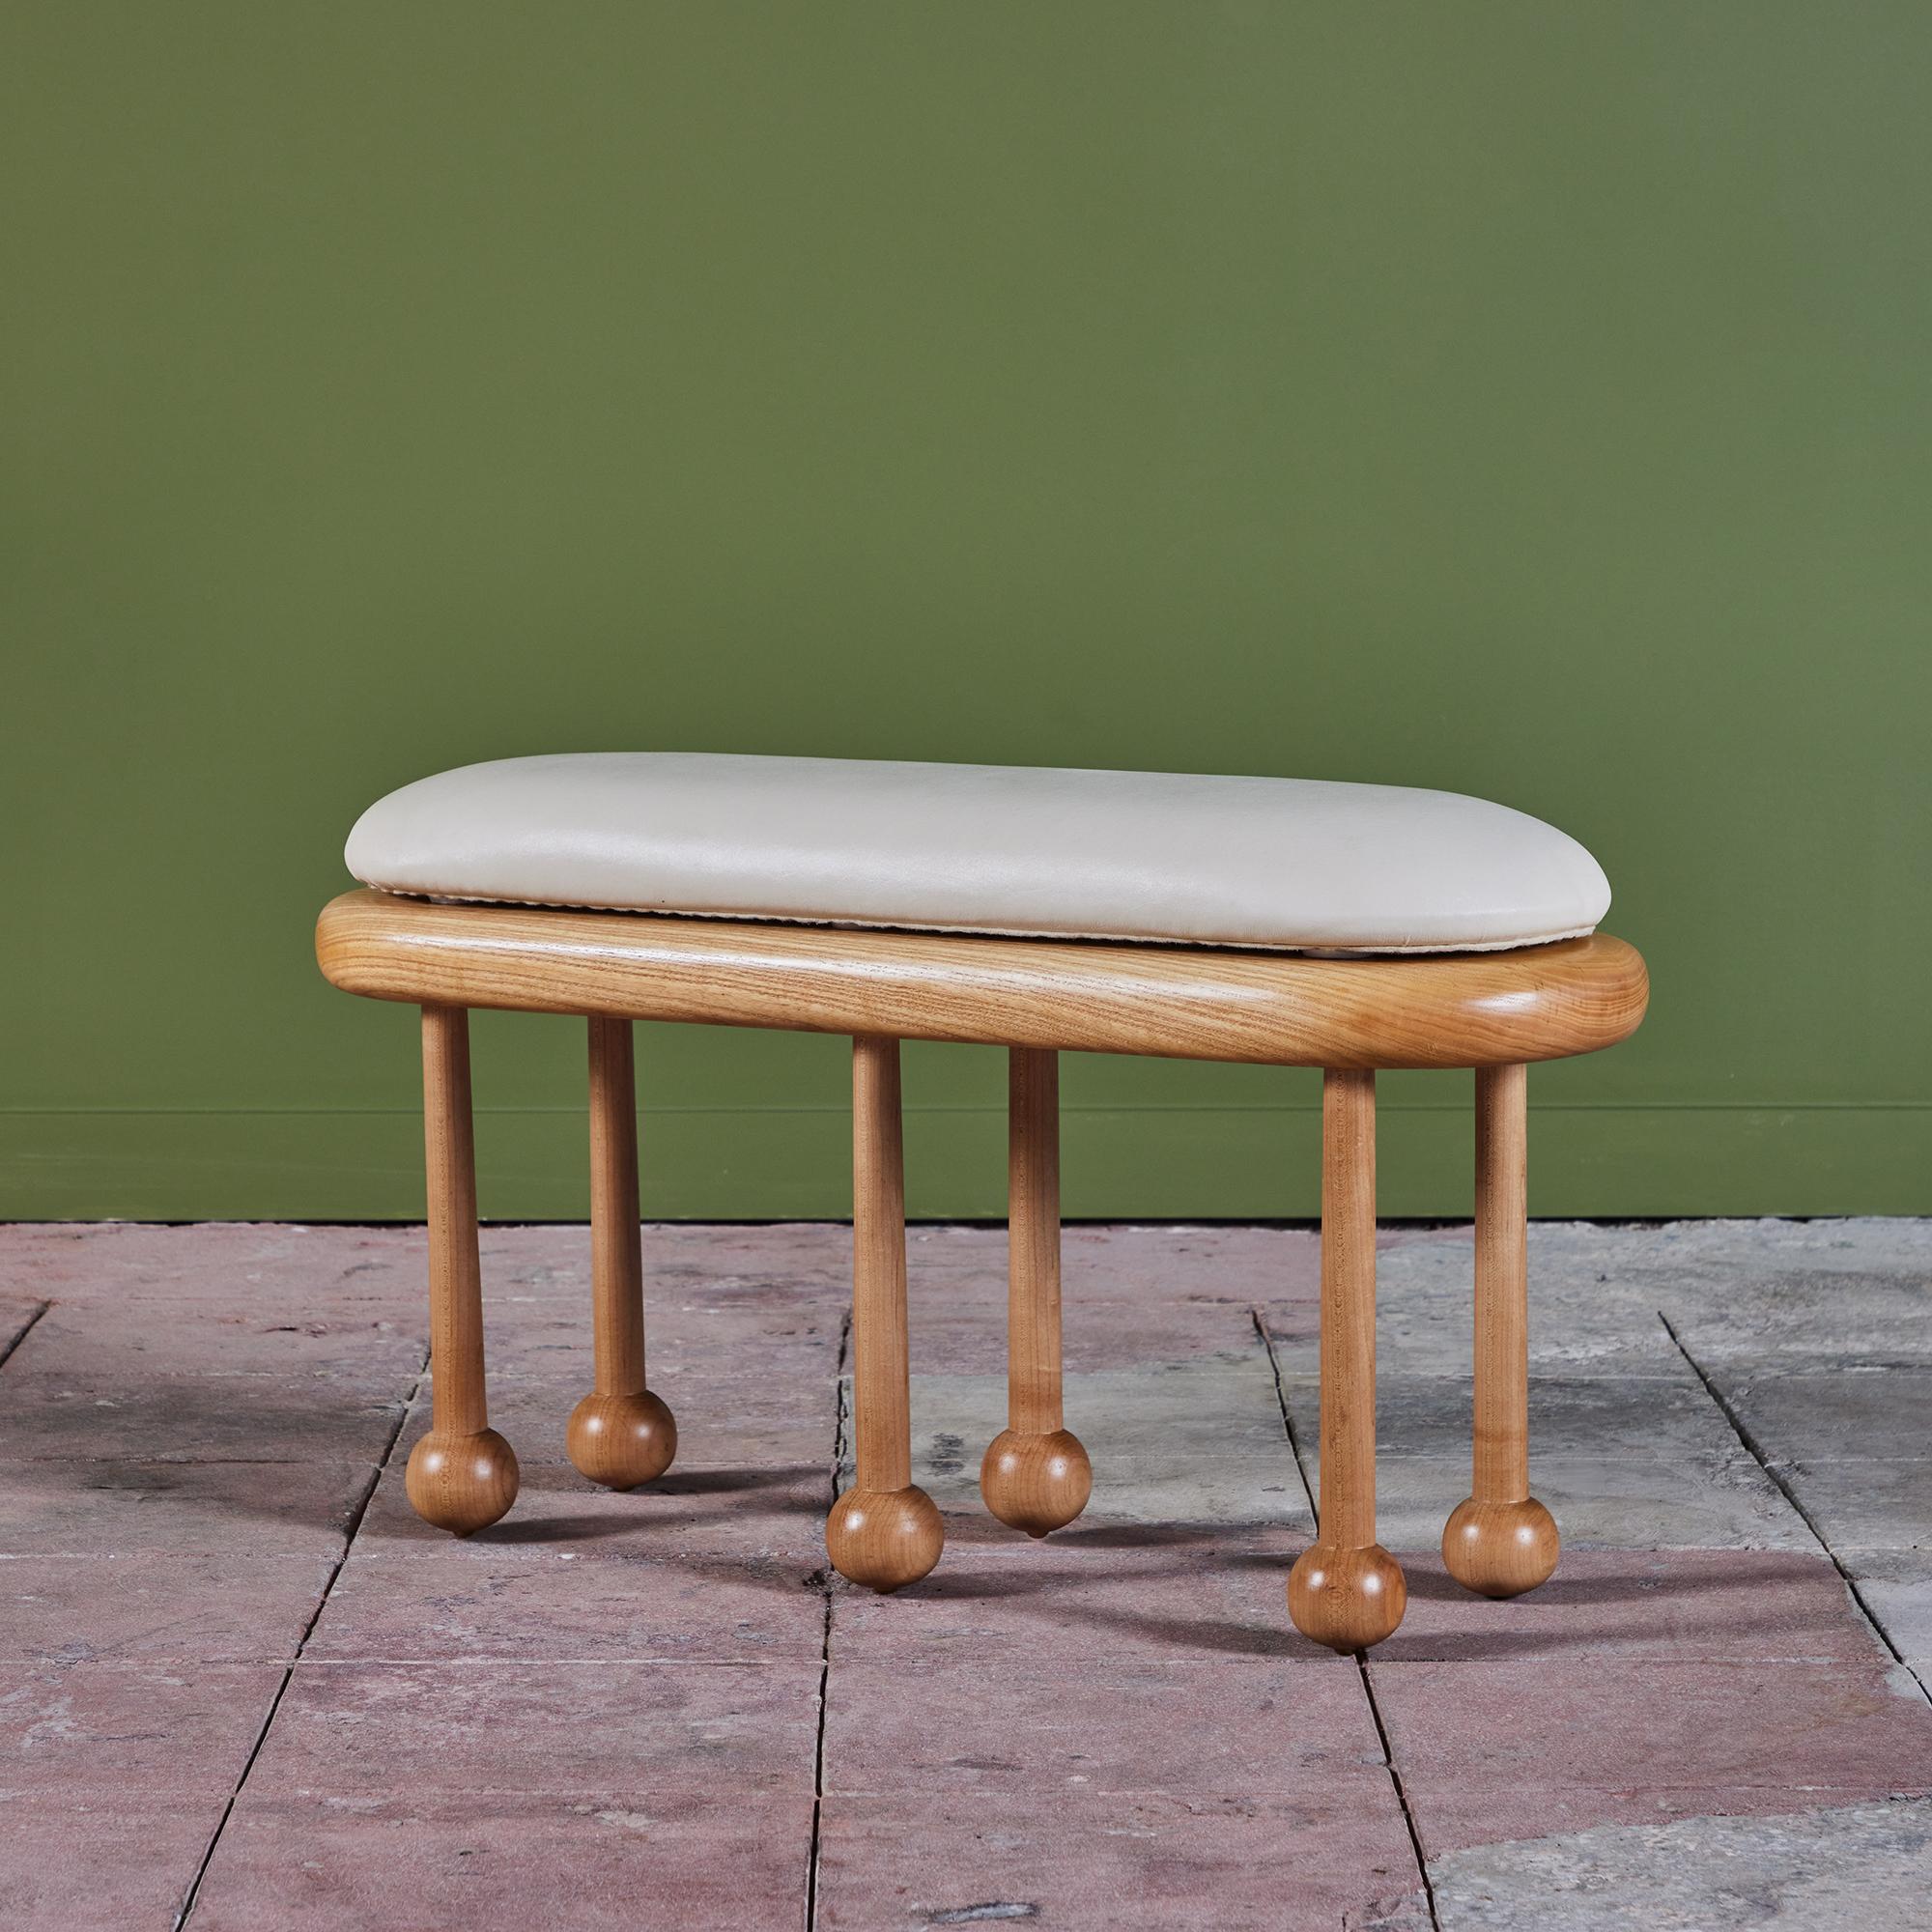 Hand crafted ash wood bench by local Los Angeles artist Evan Segota. This stool features six turned legs and an oval seat with removable Naugahyde cushion. The bottom of the cushion is felt lined and finished with brass fasteners.

Evan Segota is a